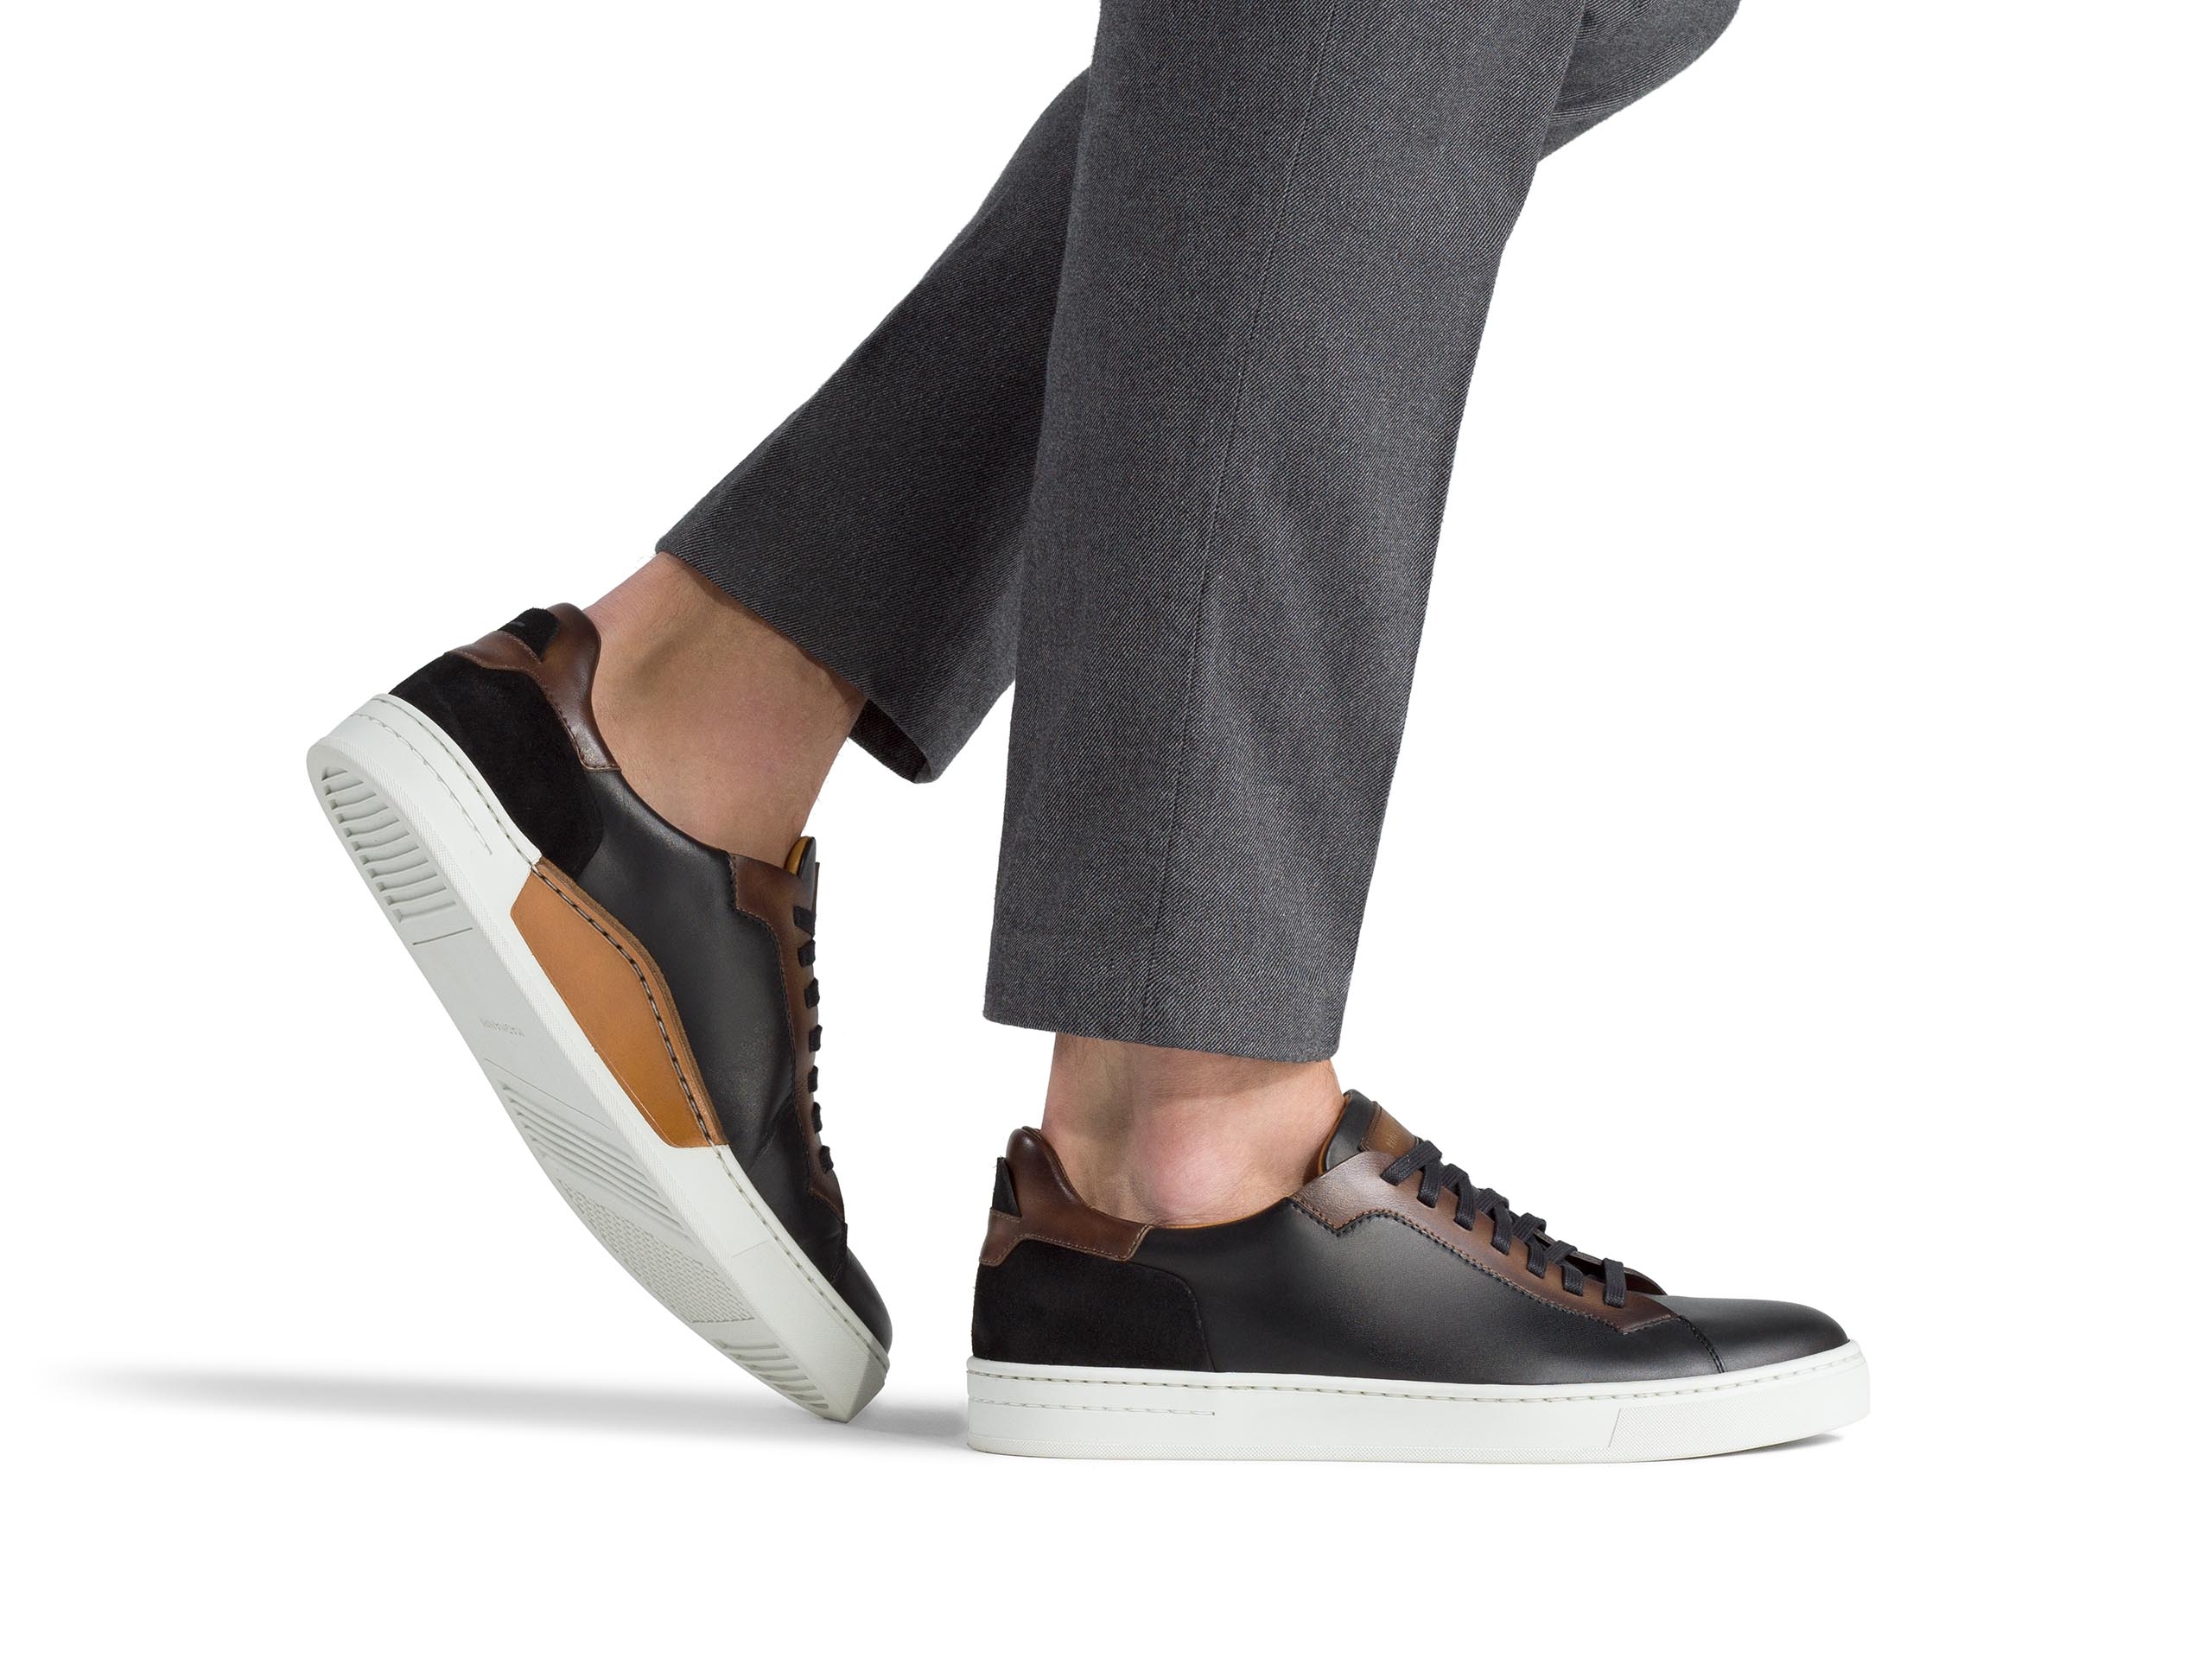 The Amadeo Black / Brown pairs well with grey pants